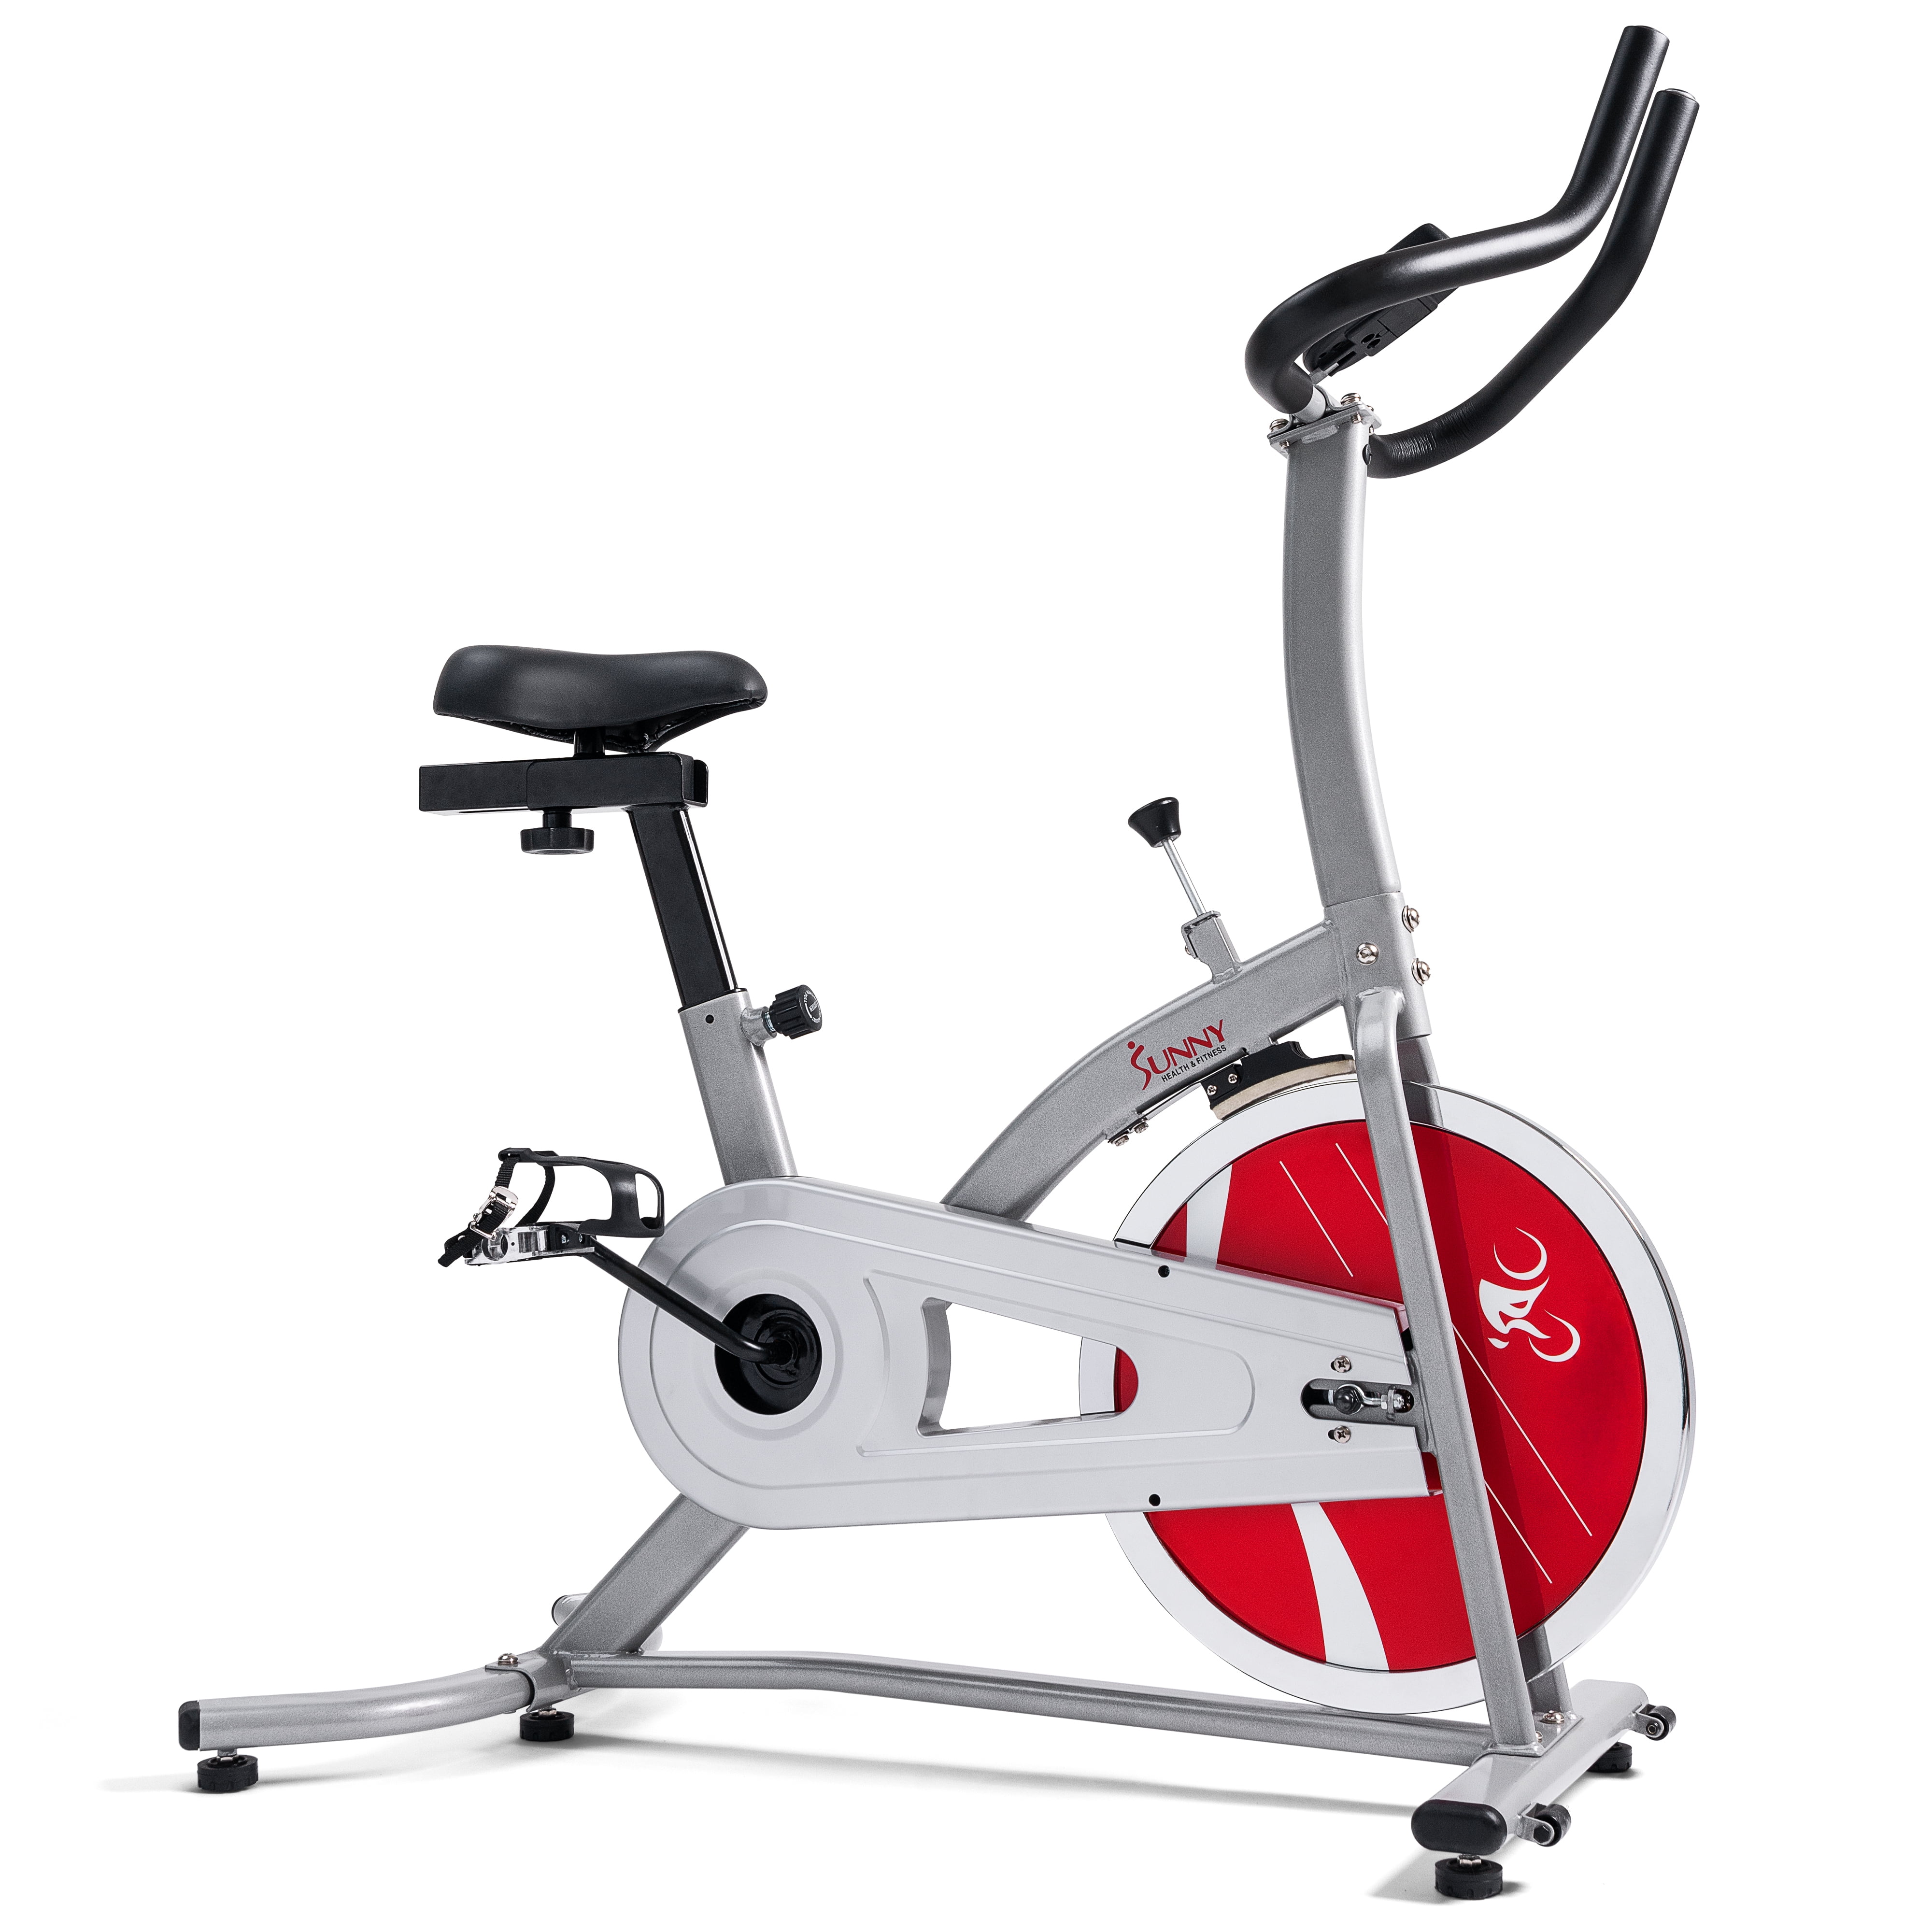 SPINNING DVD's *NEW* RIDES Indoor Cycling Complete Series 